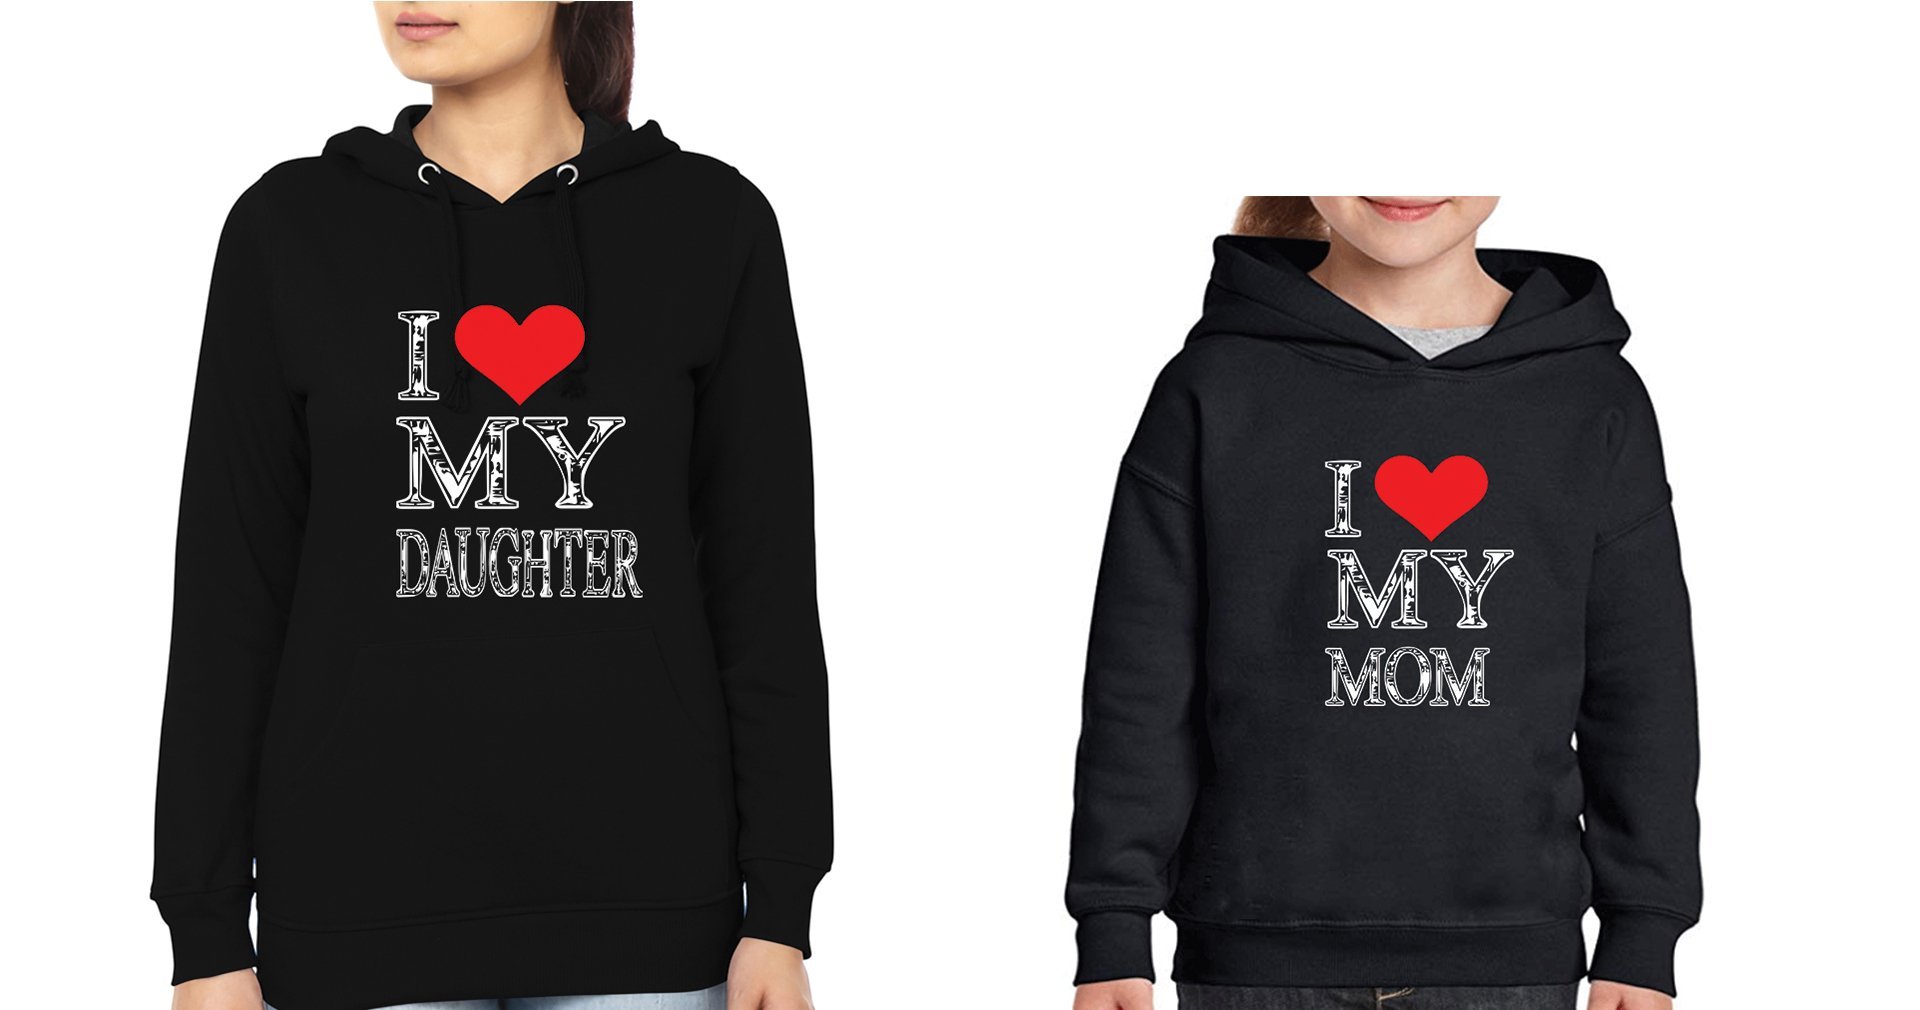 I Love My Daughter I Love My Mom Mother and Daughter Matching Hoodies- FunkyTradition - FunkyTradition